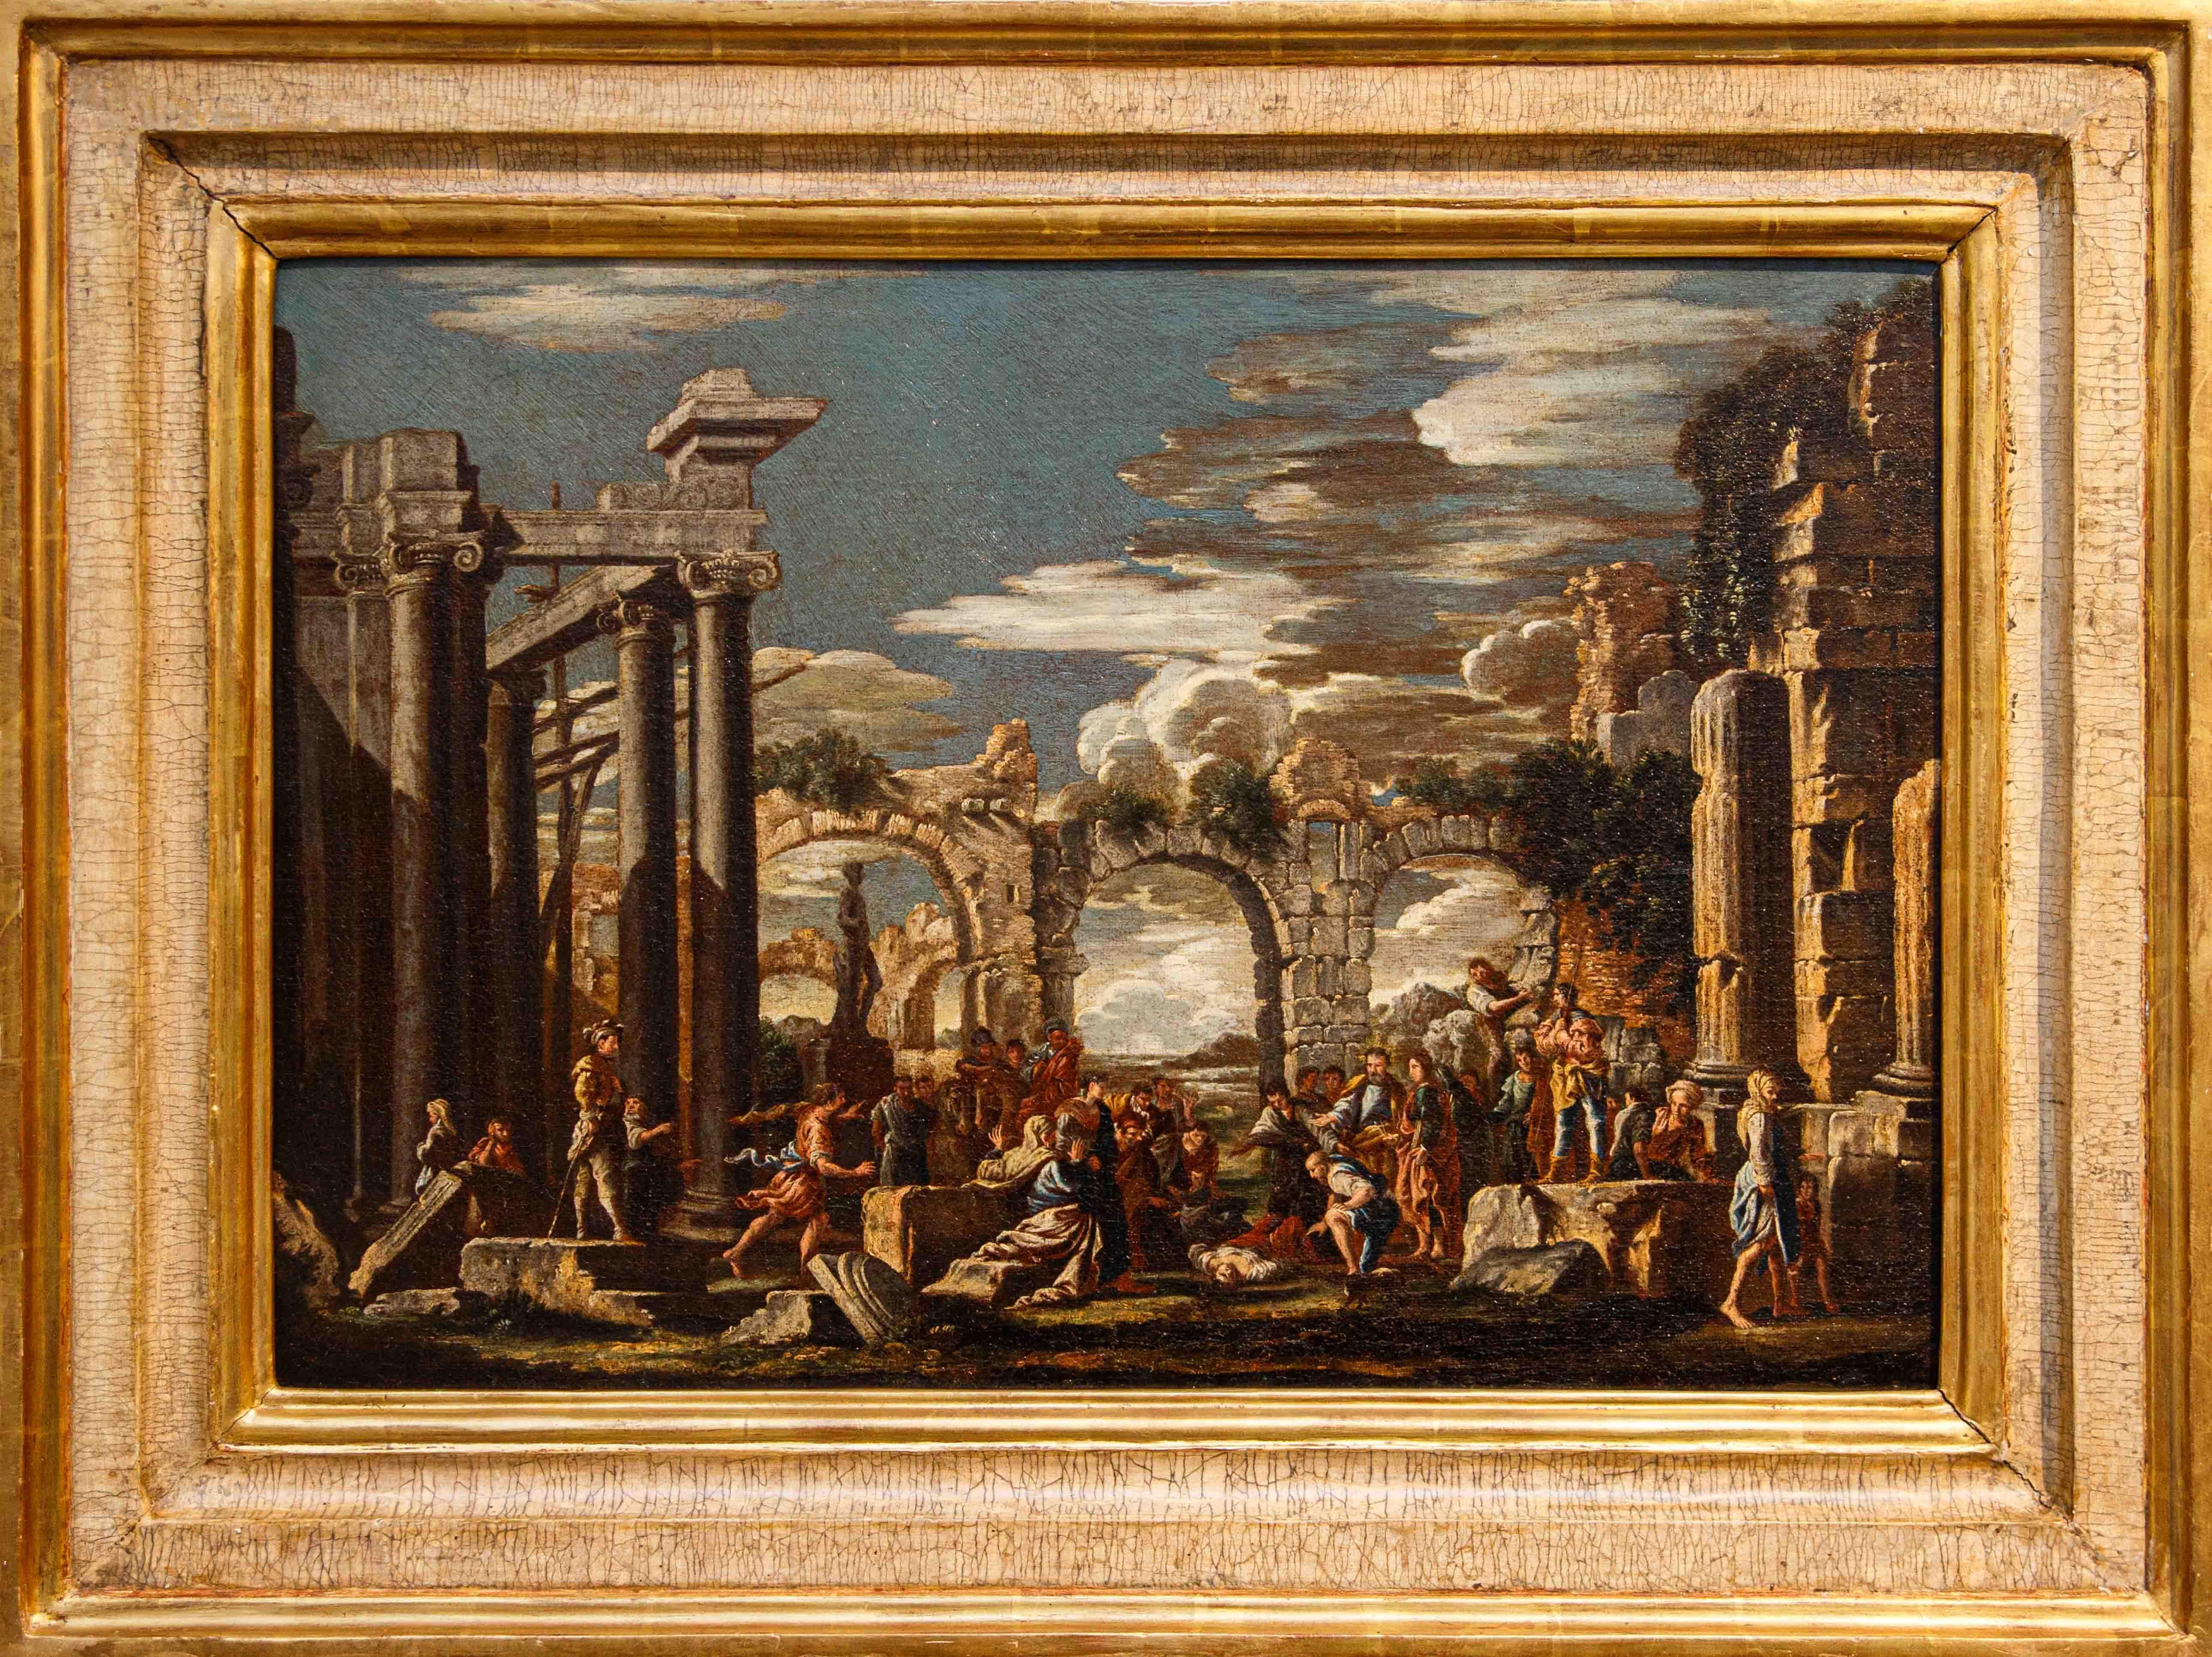 Giovanni Ghisolfi (Milan, 1623 - 1683), attr.
Capriccio with biblical scene
Oil on canvas, 50X74 cm
Framed, 67 x 90 cm

The work under consideration depicts a biblical episode within a background of classical architectural ruins. More specifically,